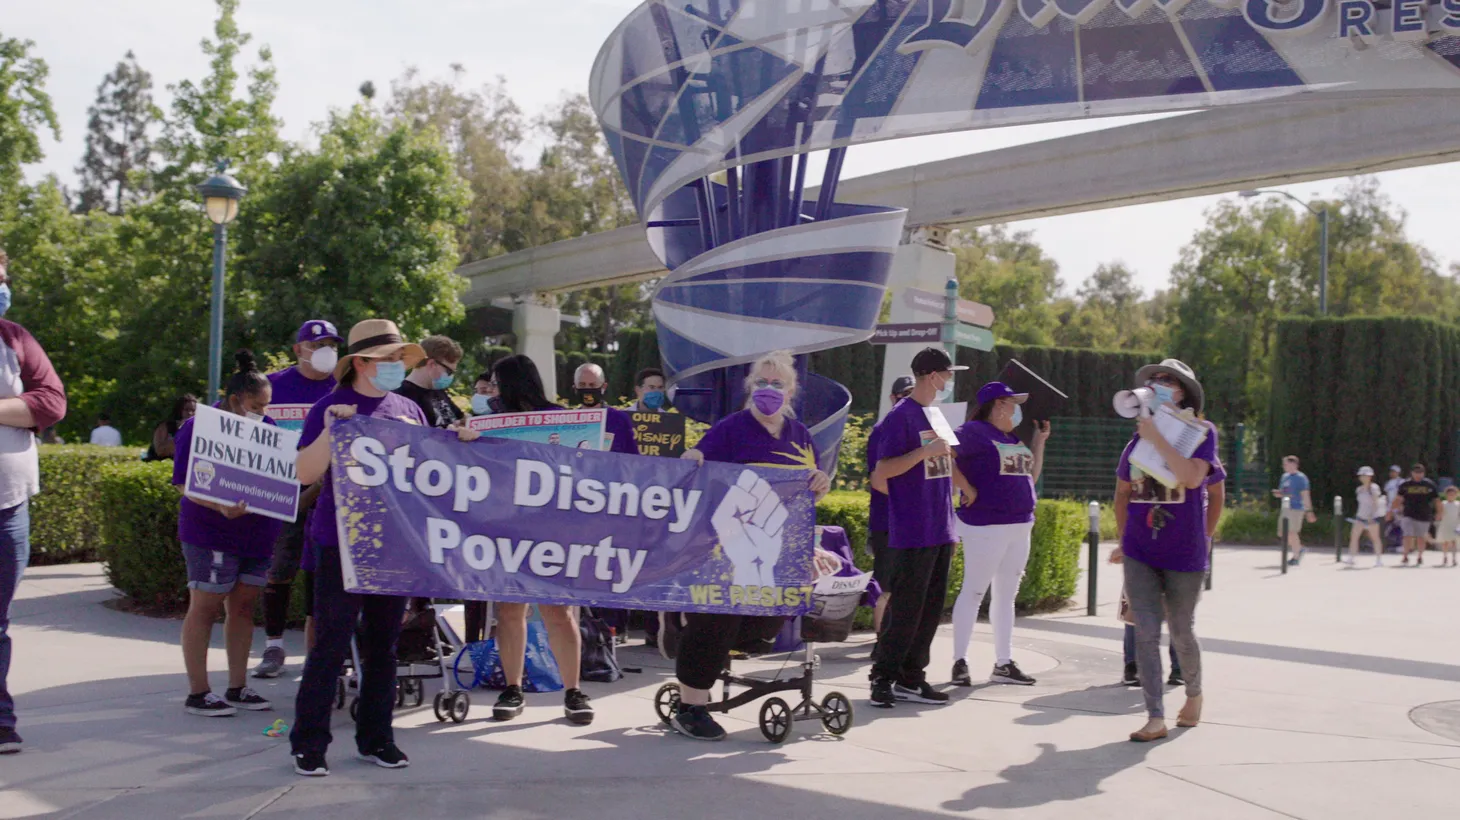 Disneyland workers demonstrate and call for better wages and working conditions outside the park in Anaheim.